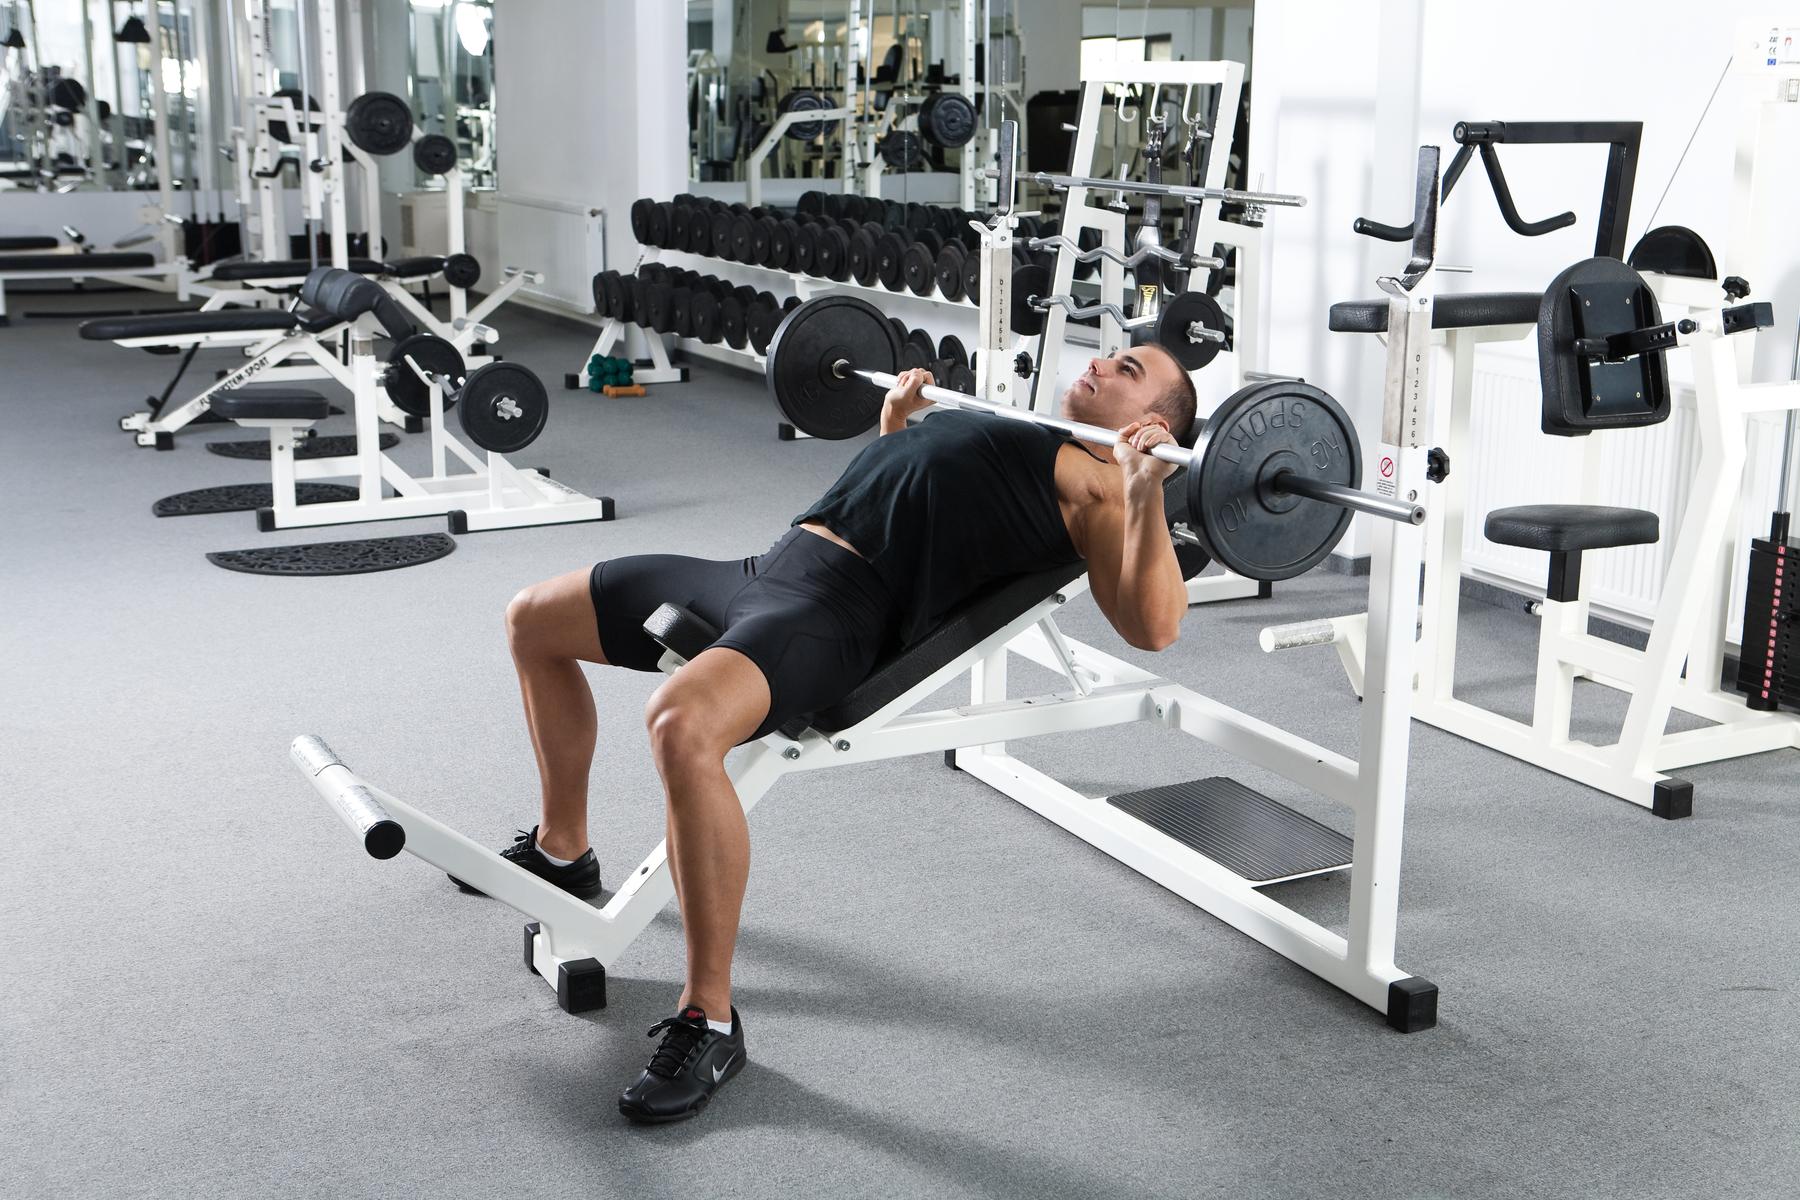 How to Isolate the Chest With Bench Press